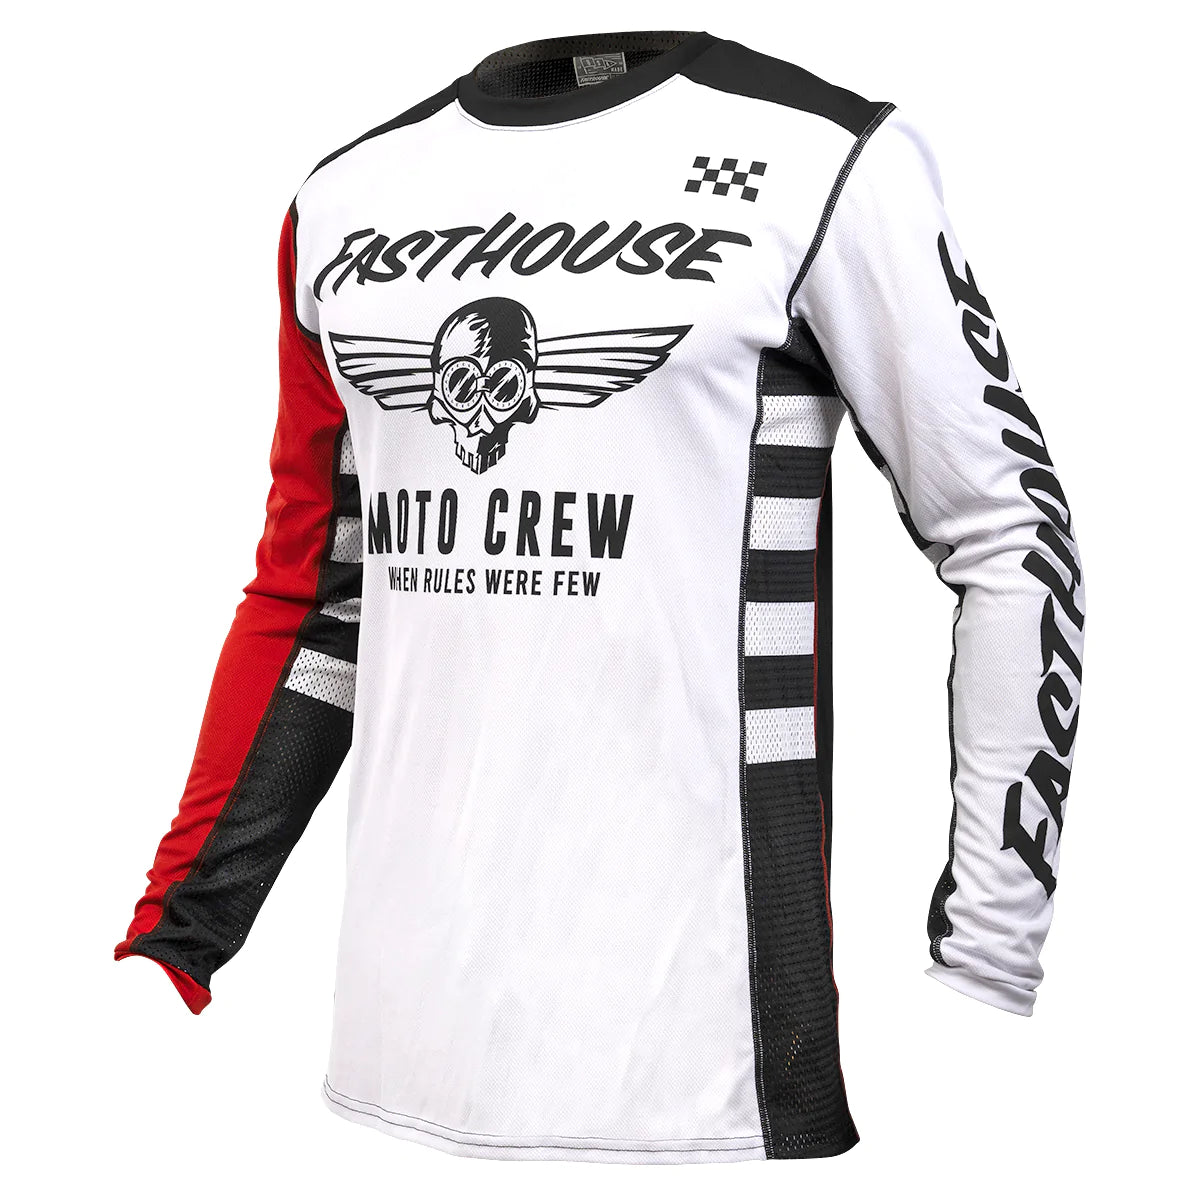 USA GRINDHOUSE FACTOR JERSEY (WHT/BLK) | Fasthouse